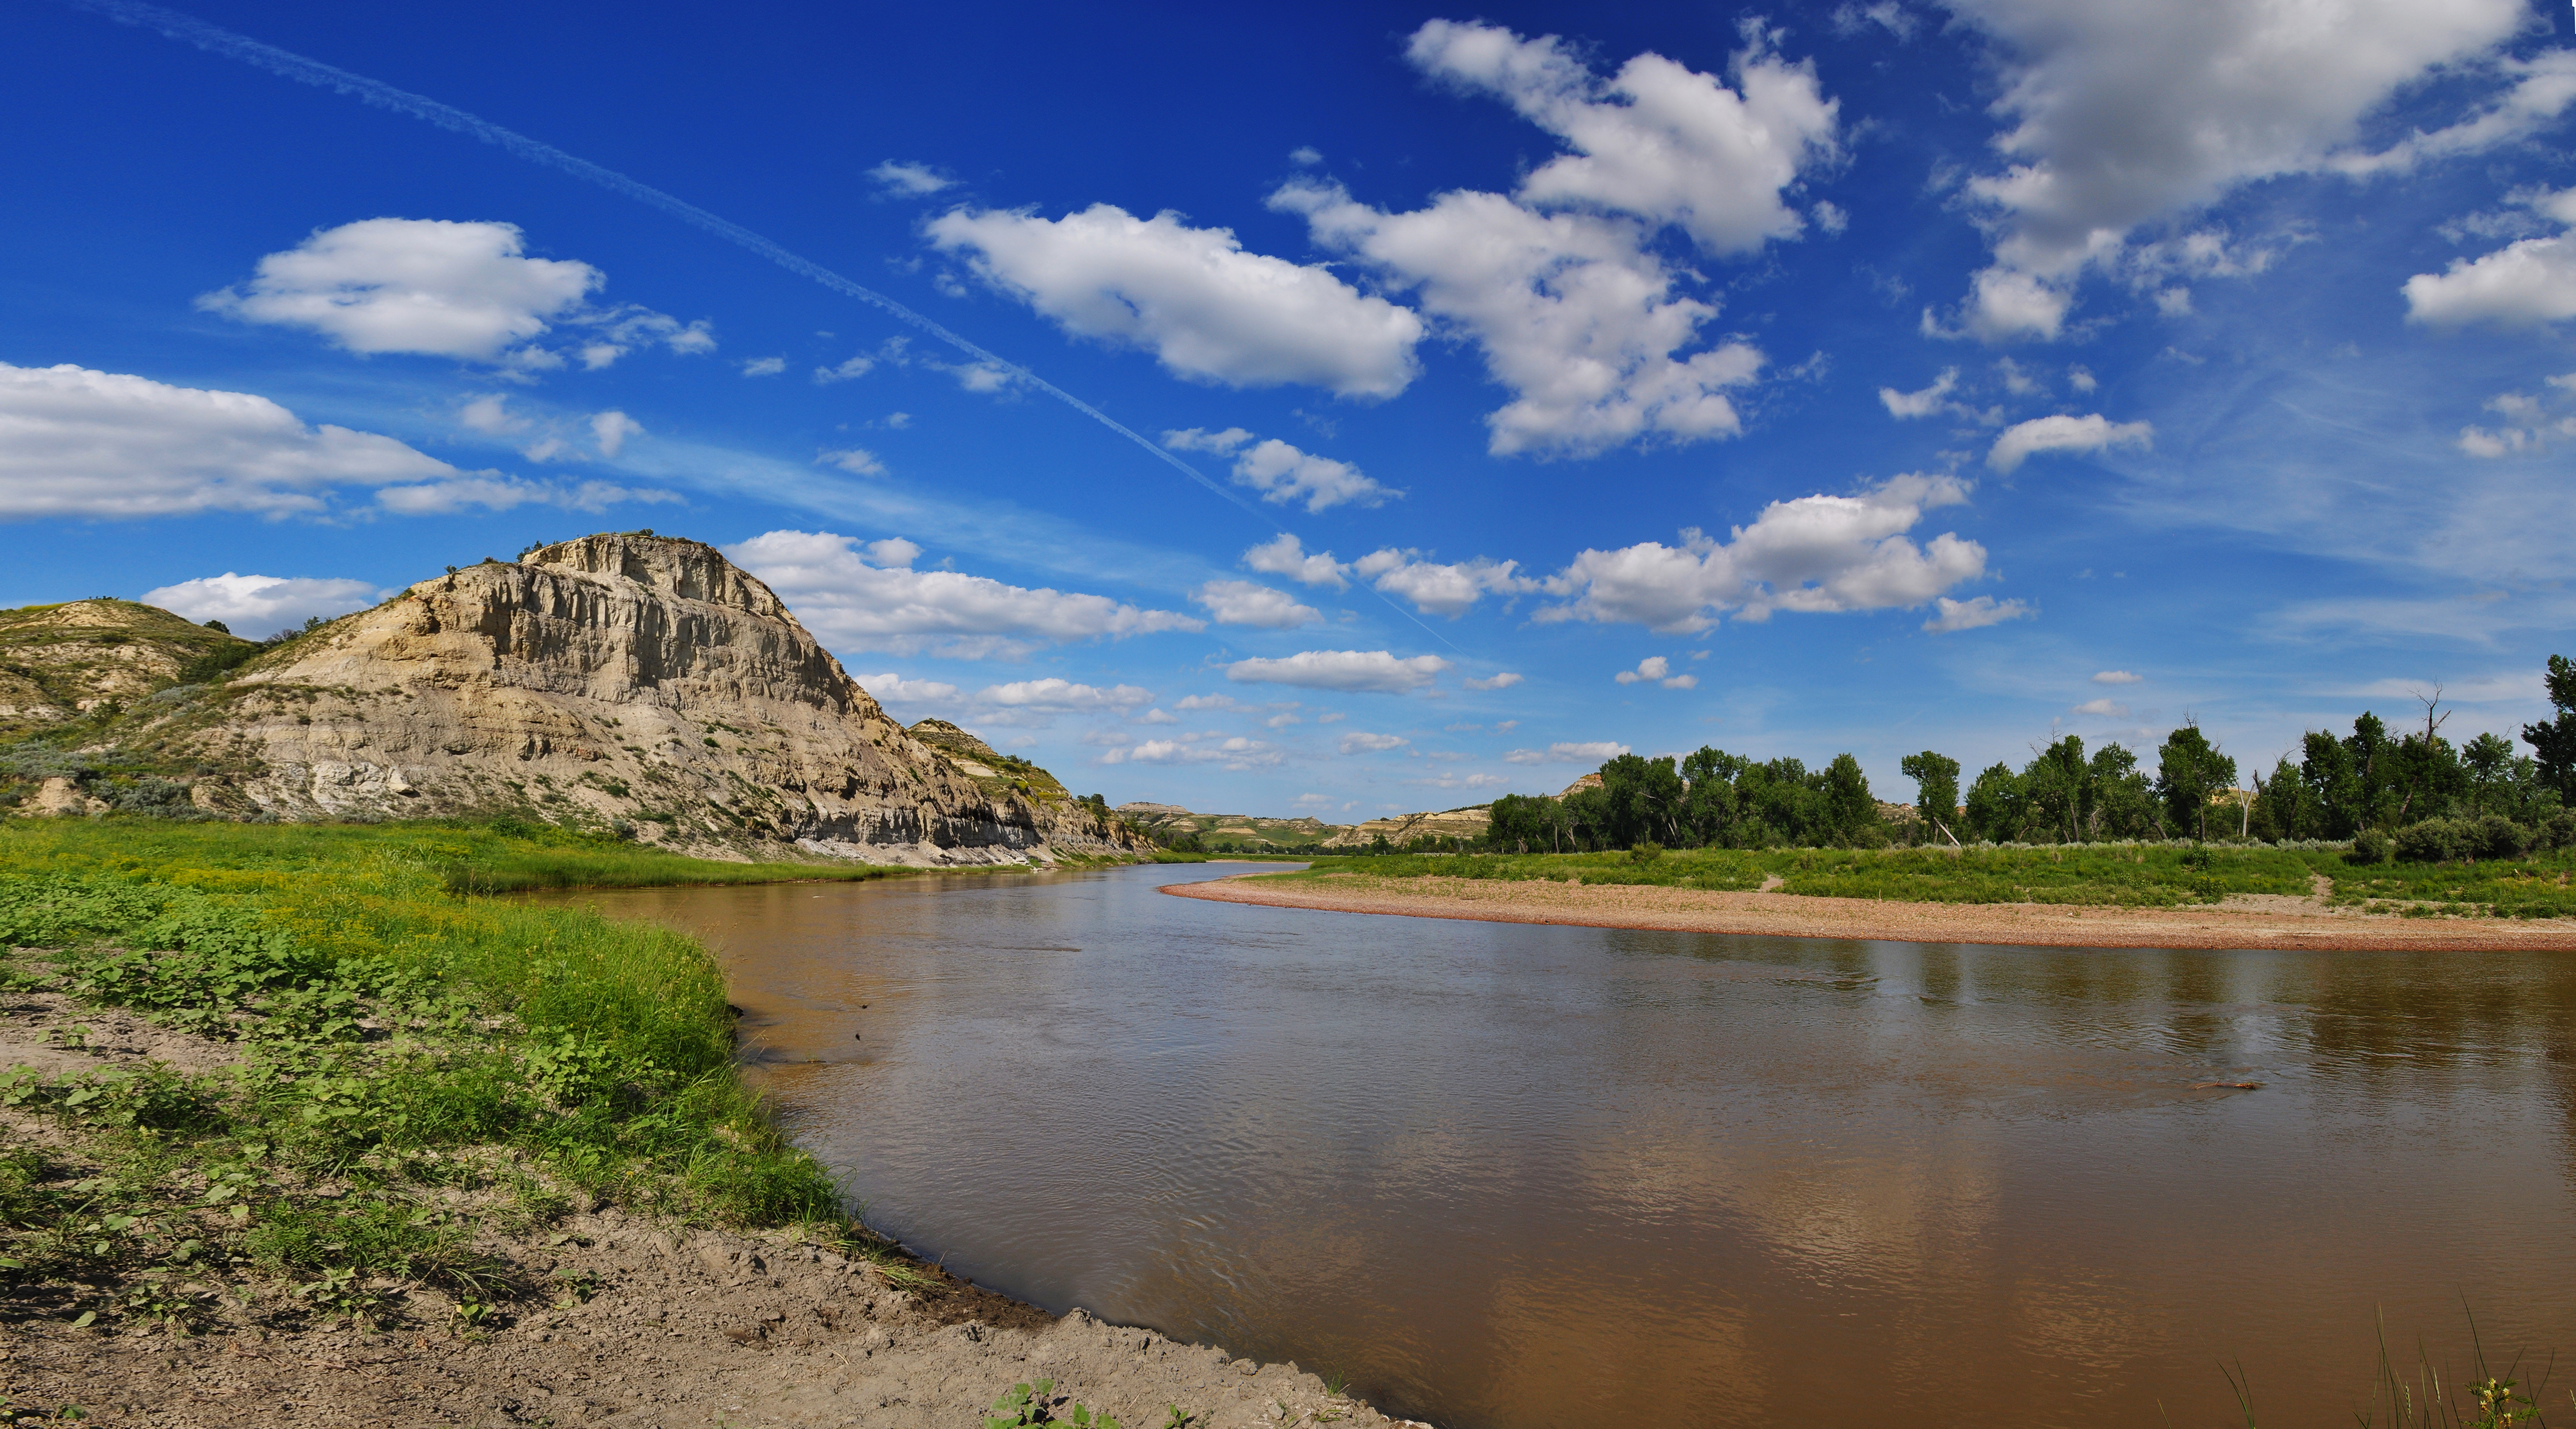 A muddy river bank lined with cottonwood trees and steep buttes